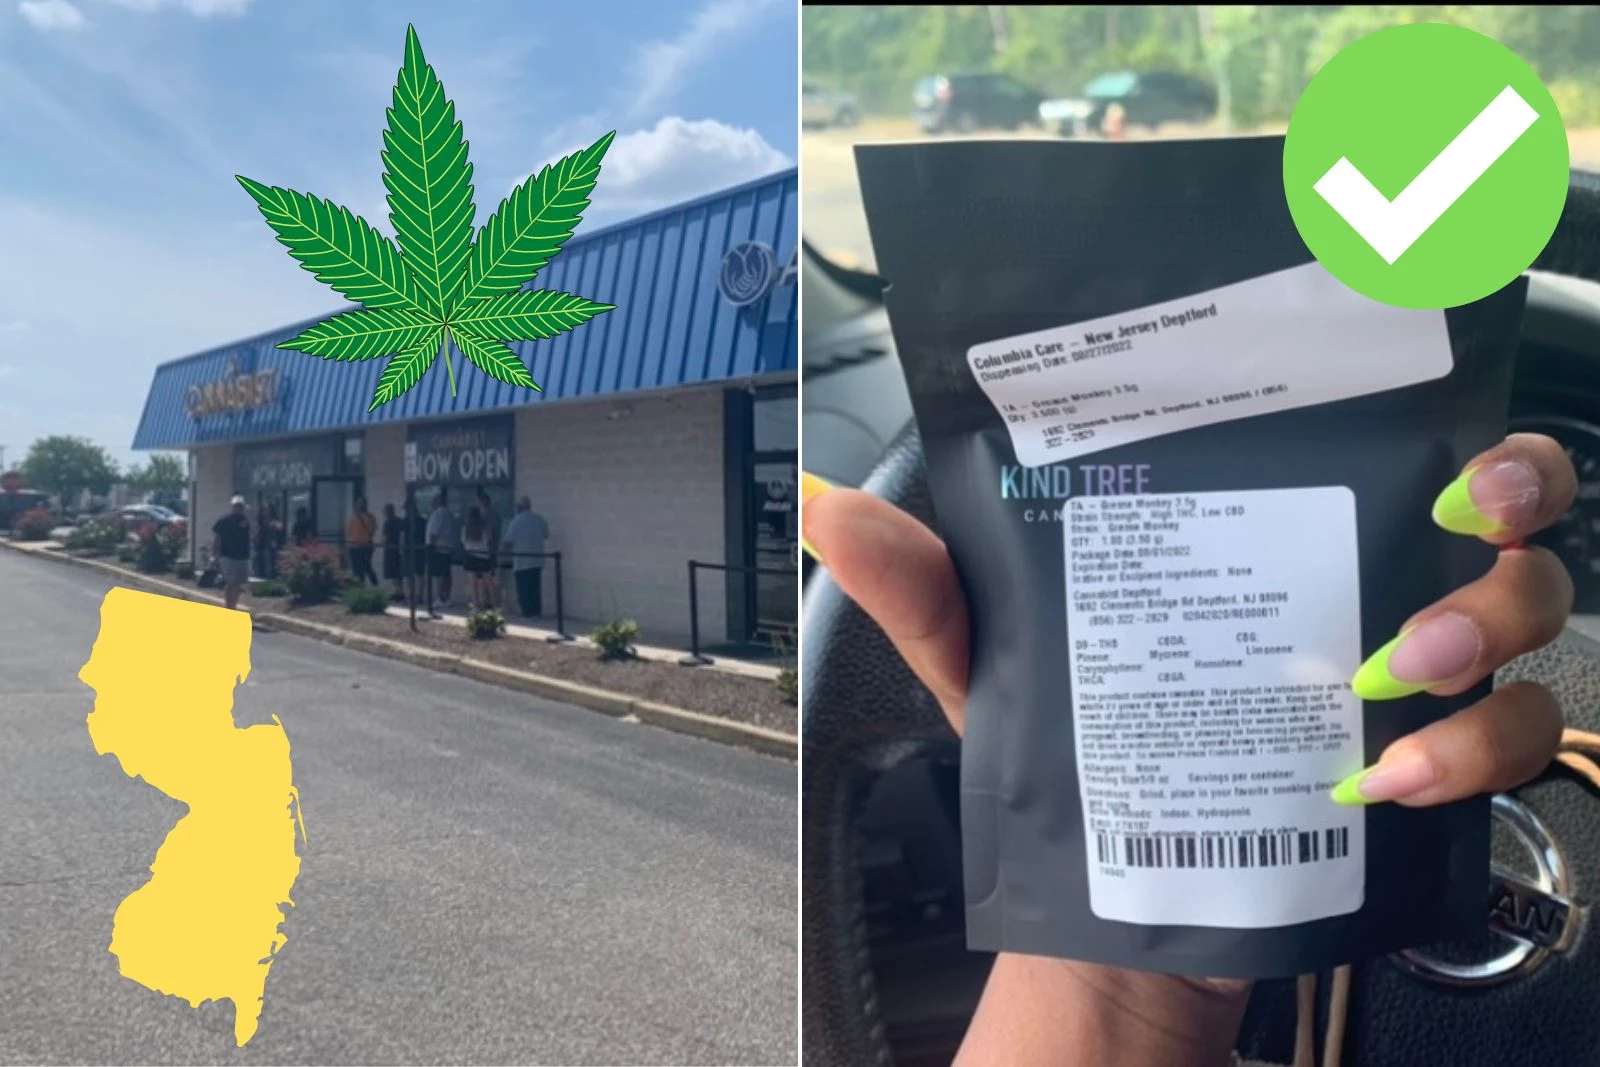 I Visited One Of NJ's Adult Weed Dispensaries. Here's How It Went